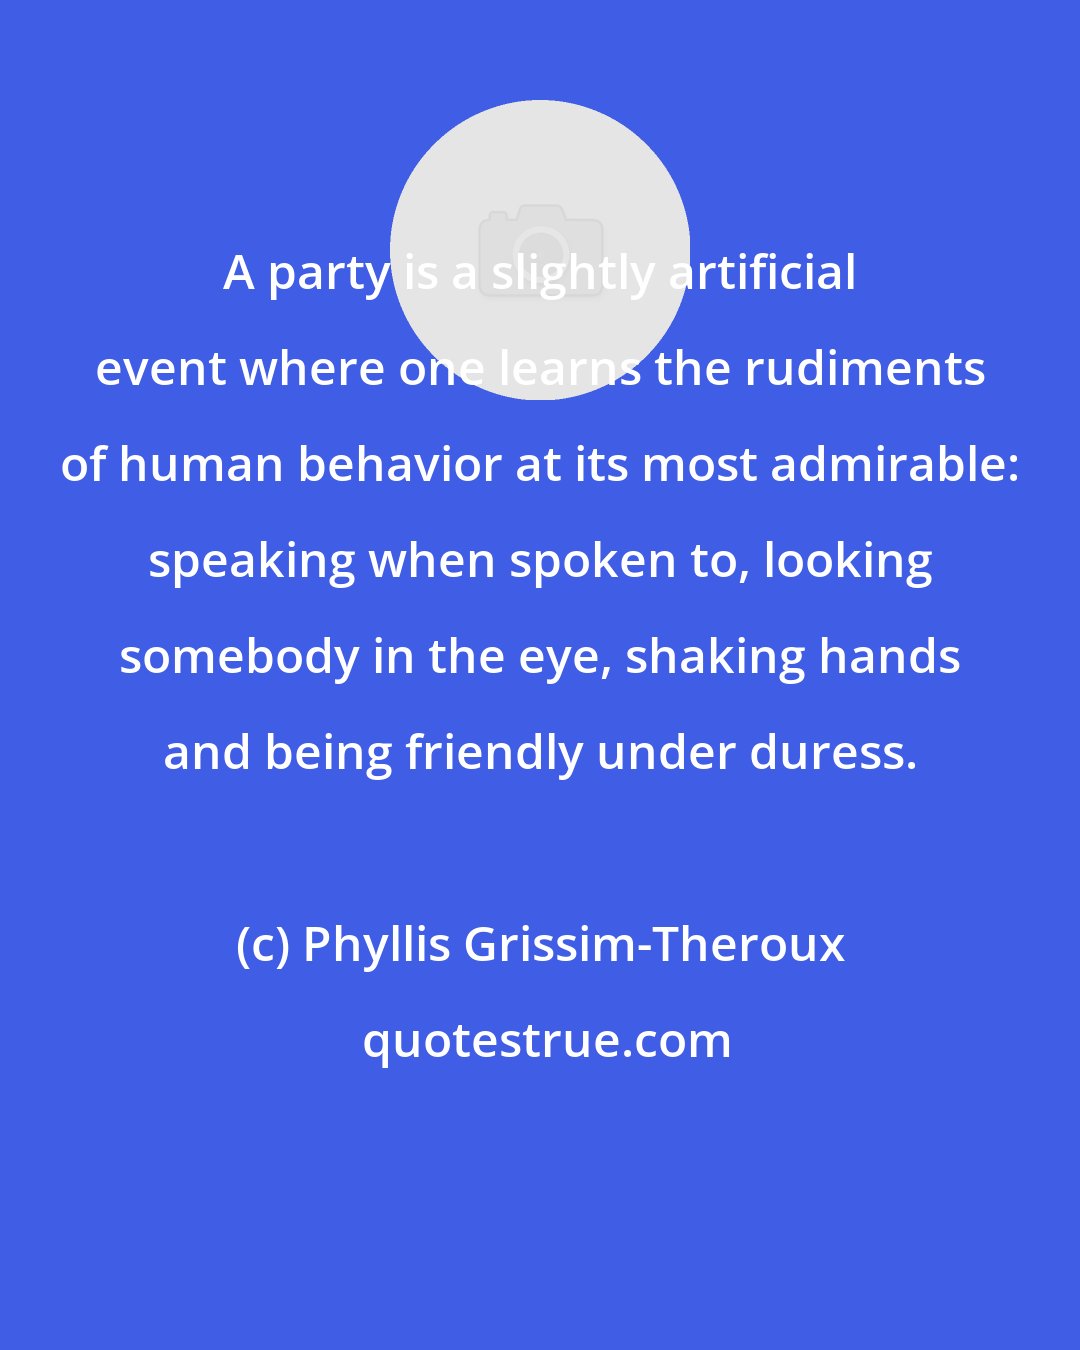 Phyllis Grissim-Theroux: A party is a slightly artificial event where one learns the rudiments of human behavior at its most admirable: speaking when spoken to, looking somebody in the eye, shaking hands and being friendly under duress.